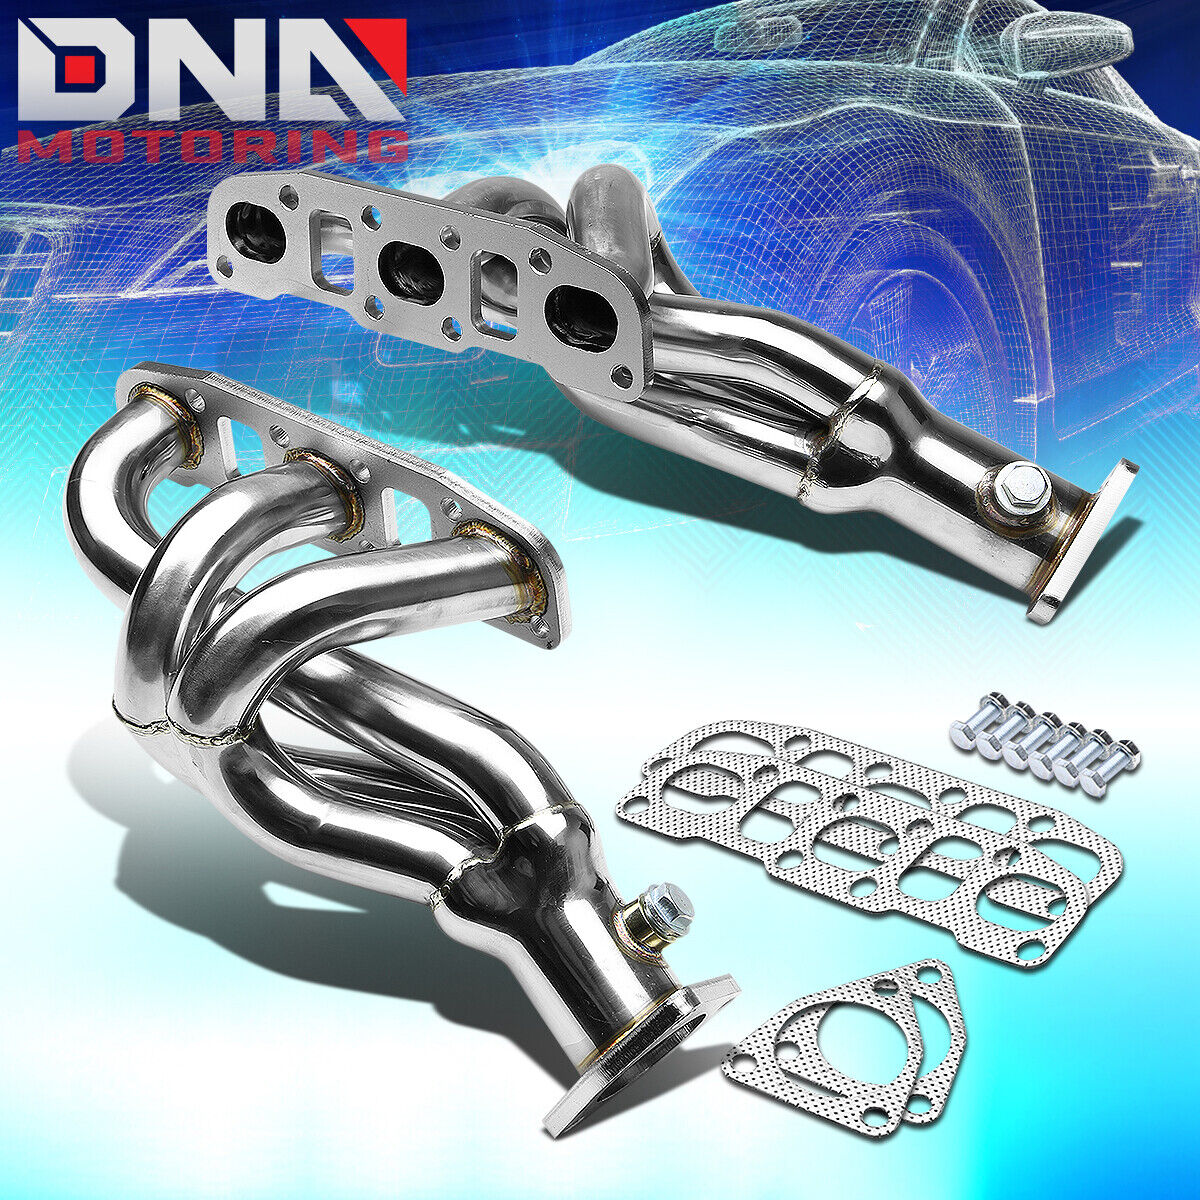 STAINLESS STEEL 6-2-1 HEADER FOR 03-06 350Z/G35 FAIRLADY Z 3.5L EXHAUST/MANIFOLD